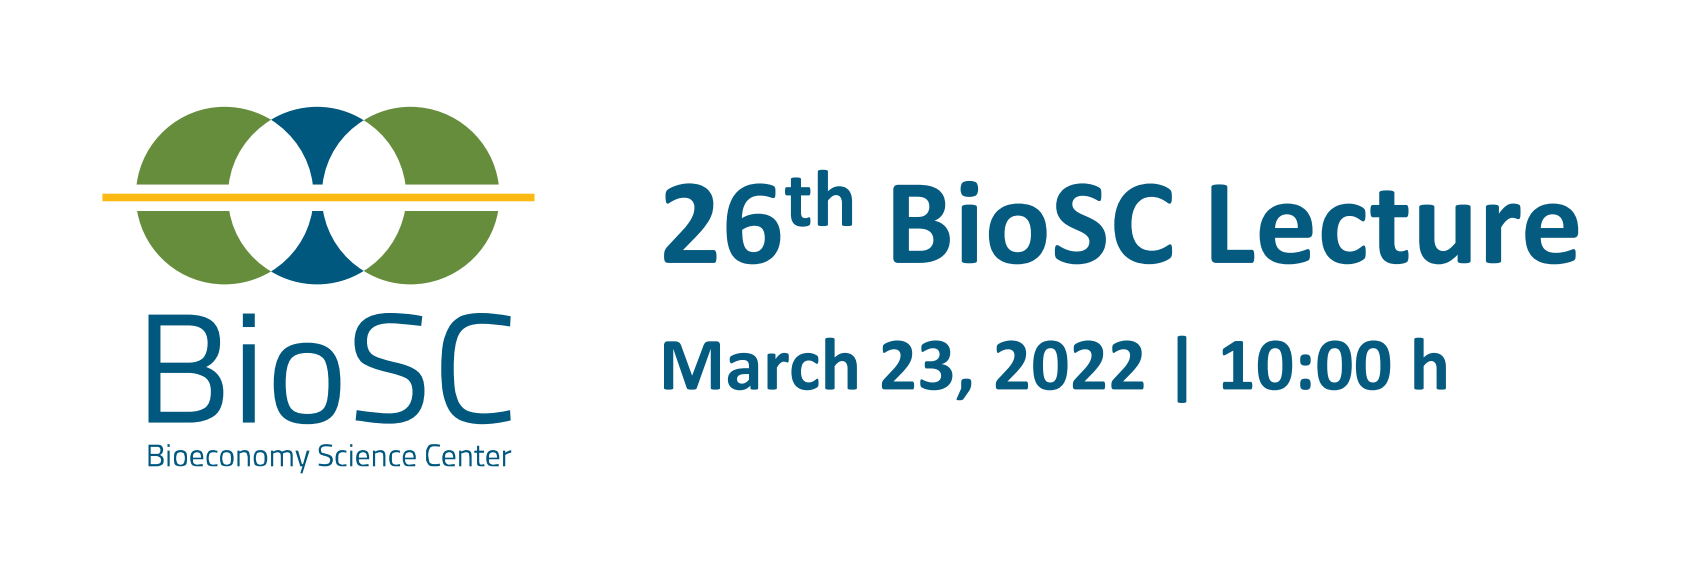 Coming up: 26th BioSC lecture with Dr. Tanja Kostic